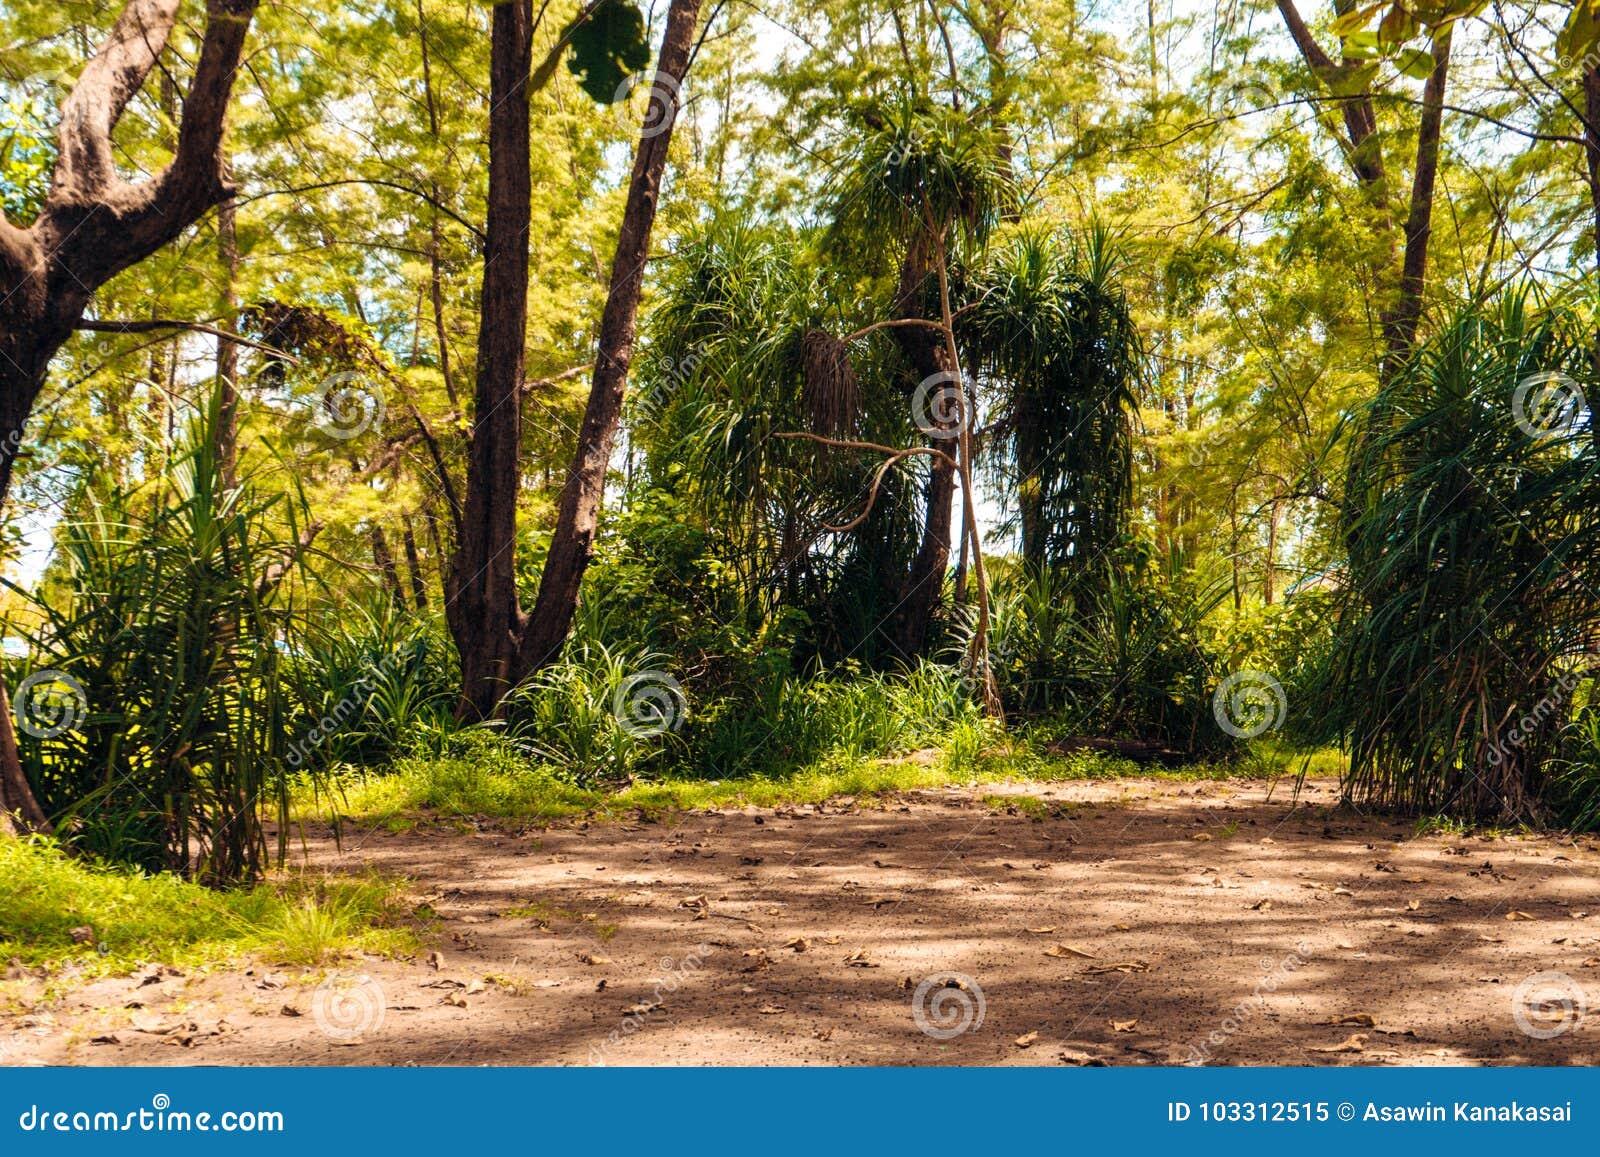 Green Leaf Forest Background Stock Image - Image of tranquil, branches